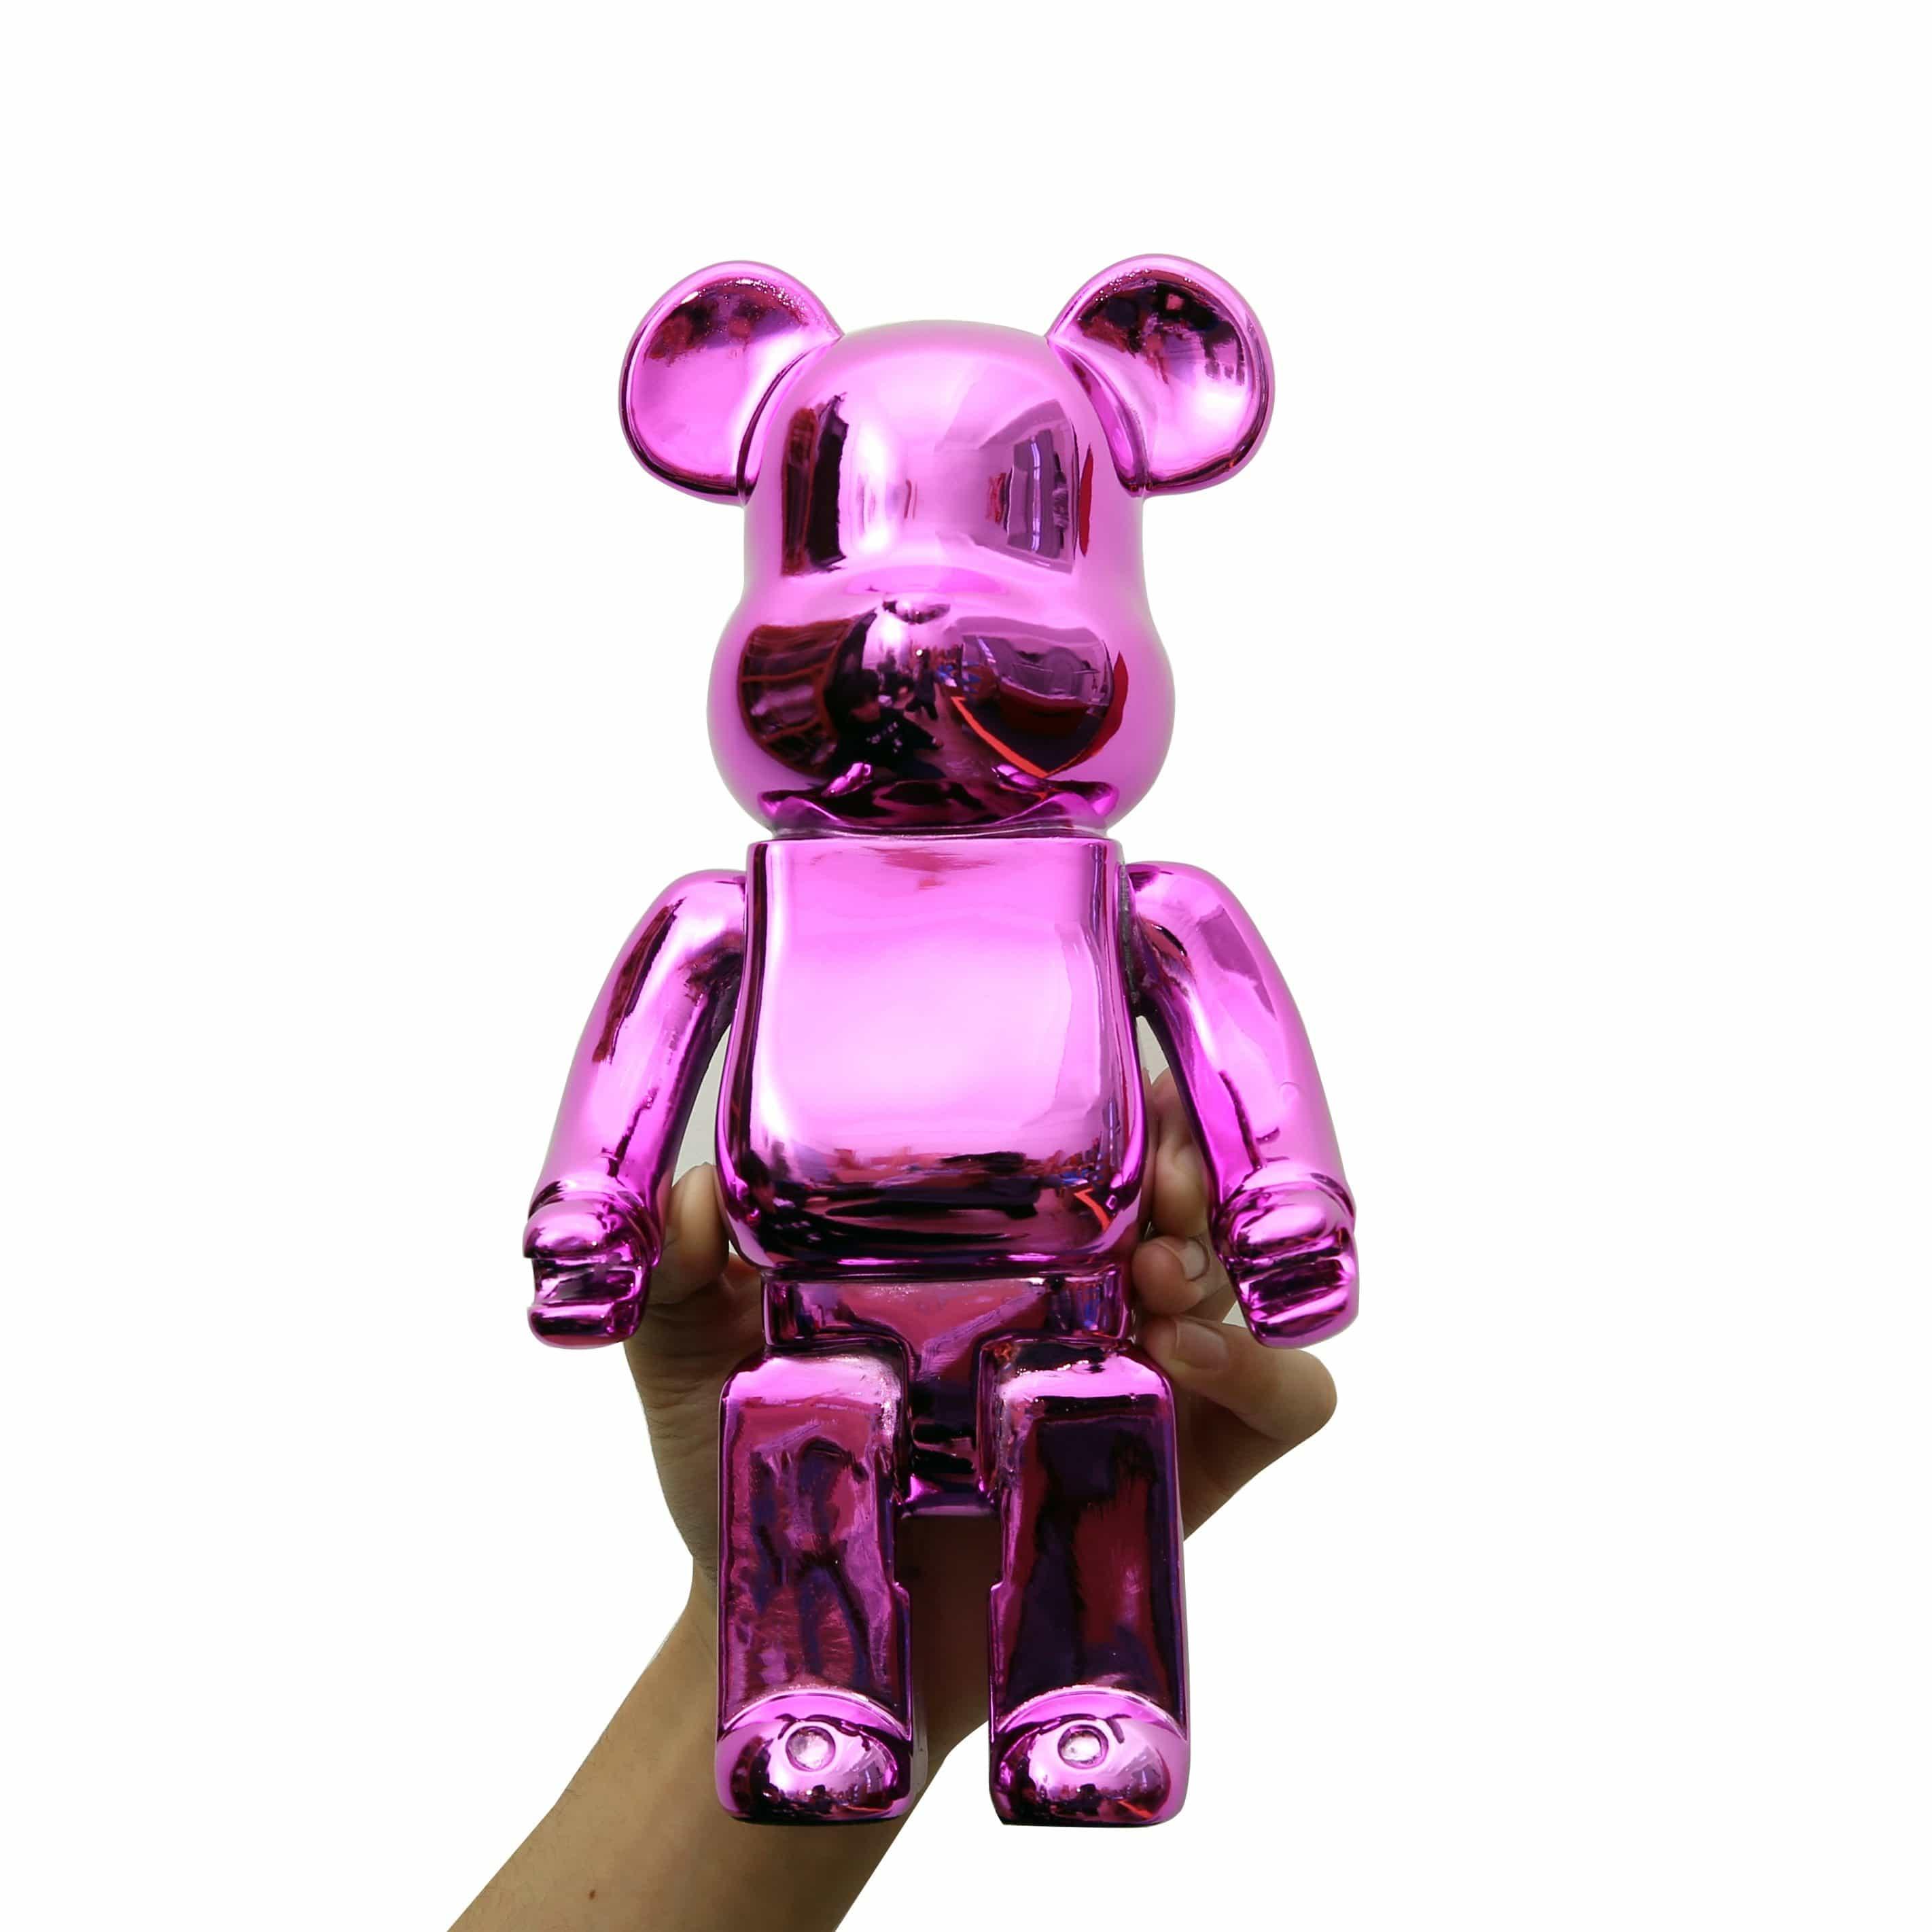 Shop 0 Pink Bearbrick Home Decoration 28Cm Bearbrick 400% Be@rbrick Games New Year's Gift Tide Play Model Plating Resin Electronic Games Kids Toys Mademoiselle Home Decor